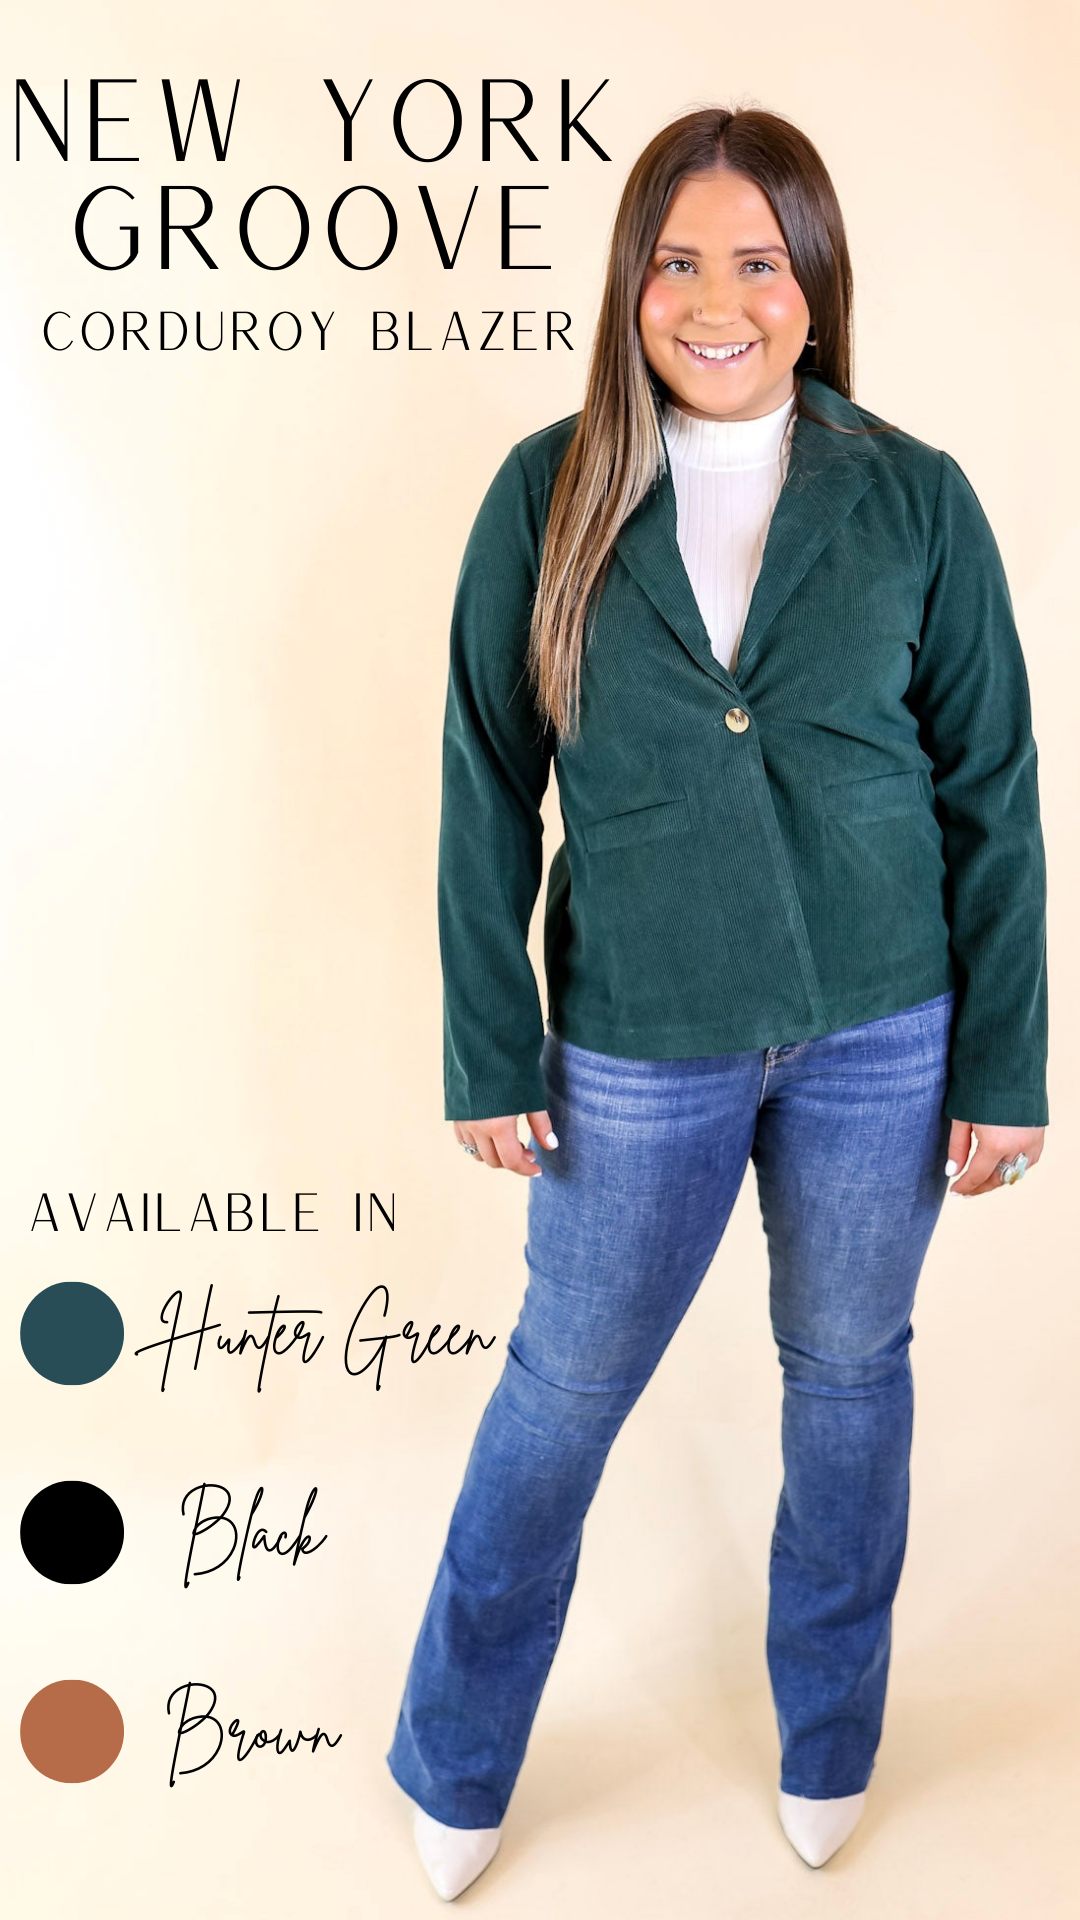 New York Groove Corduroy Blazer in Hunter Green - Giddy Up Glamour Boutique